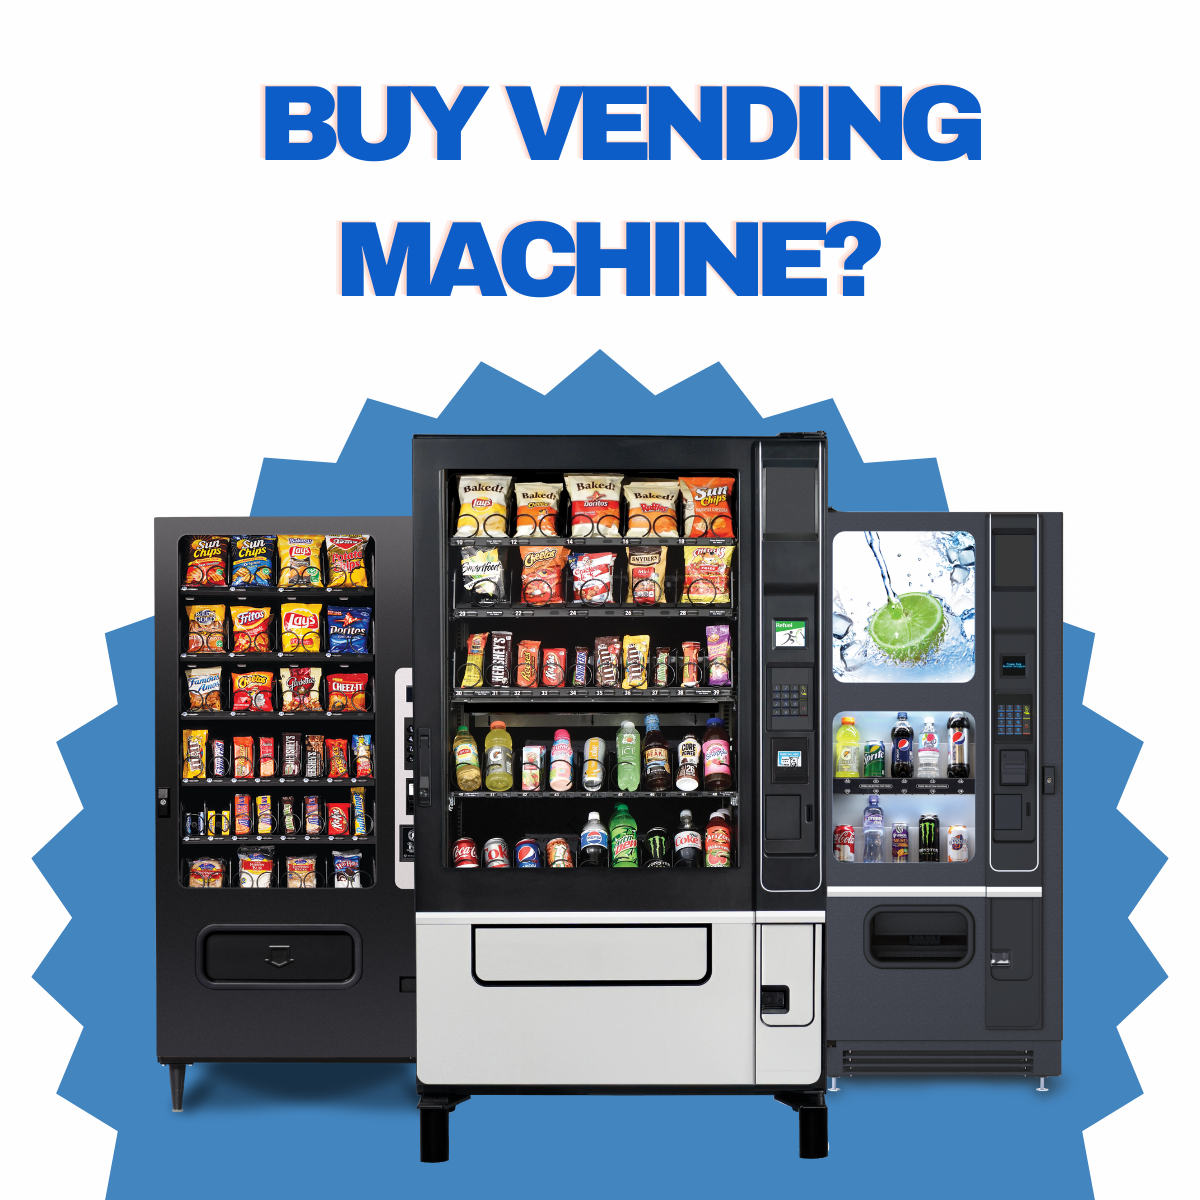 WHICH PRODUCTS SHOULD I BUY FOR MY VENDING MACHINE?